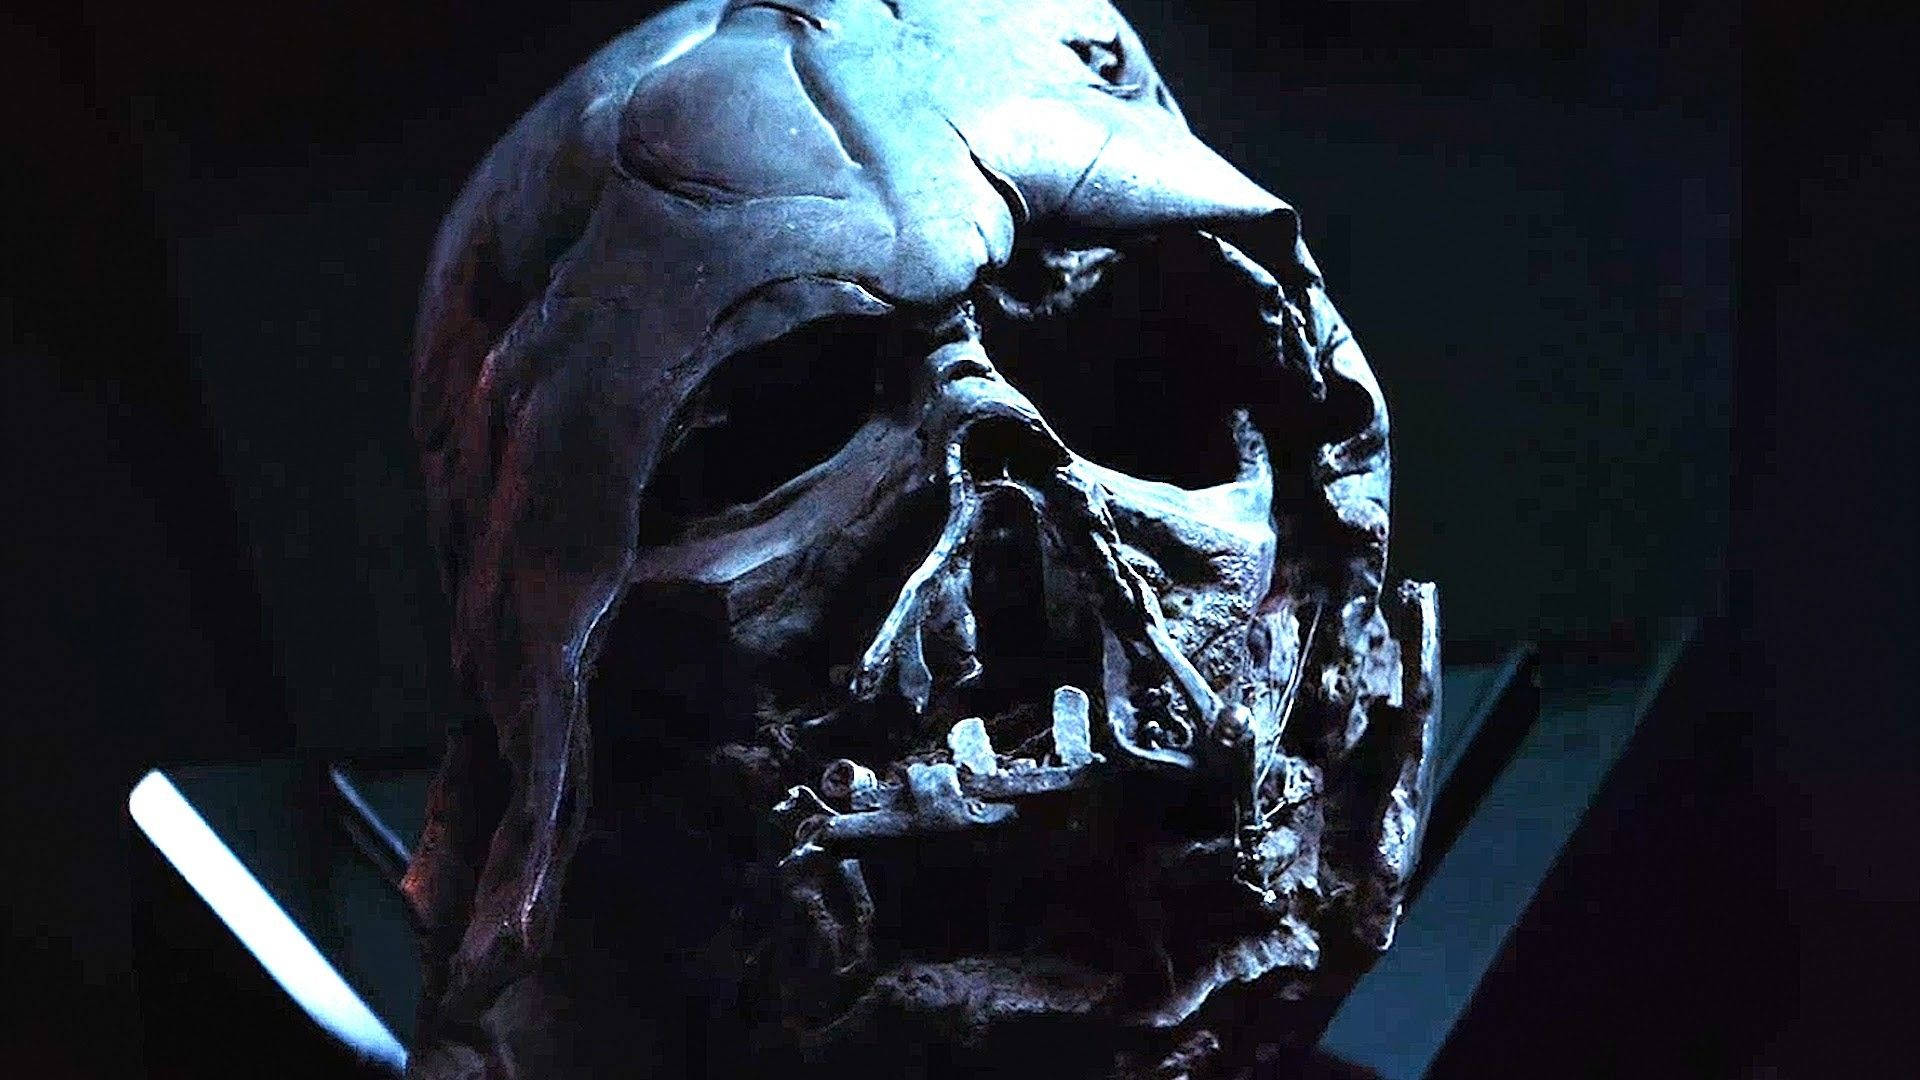 Lord Vader's Iconic Mask with a Gothic Edge Wallpaper